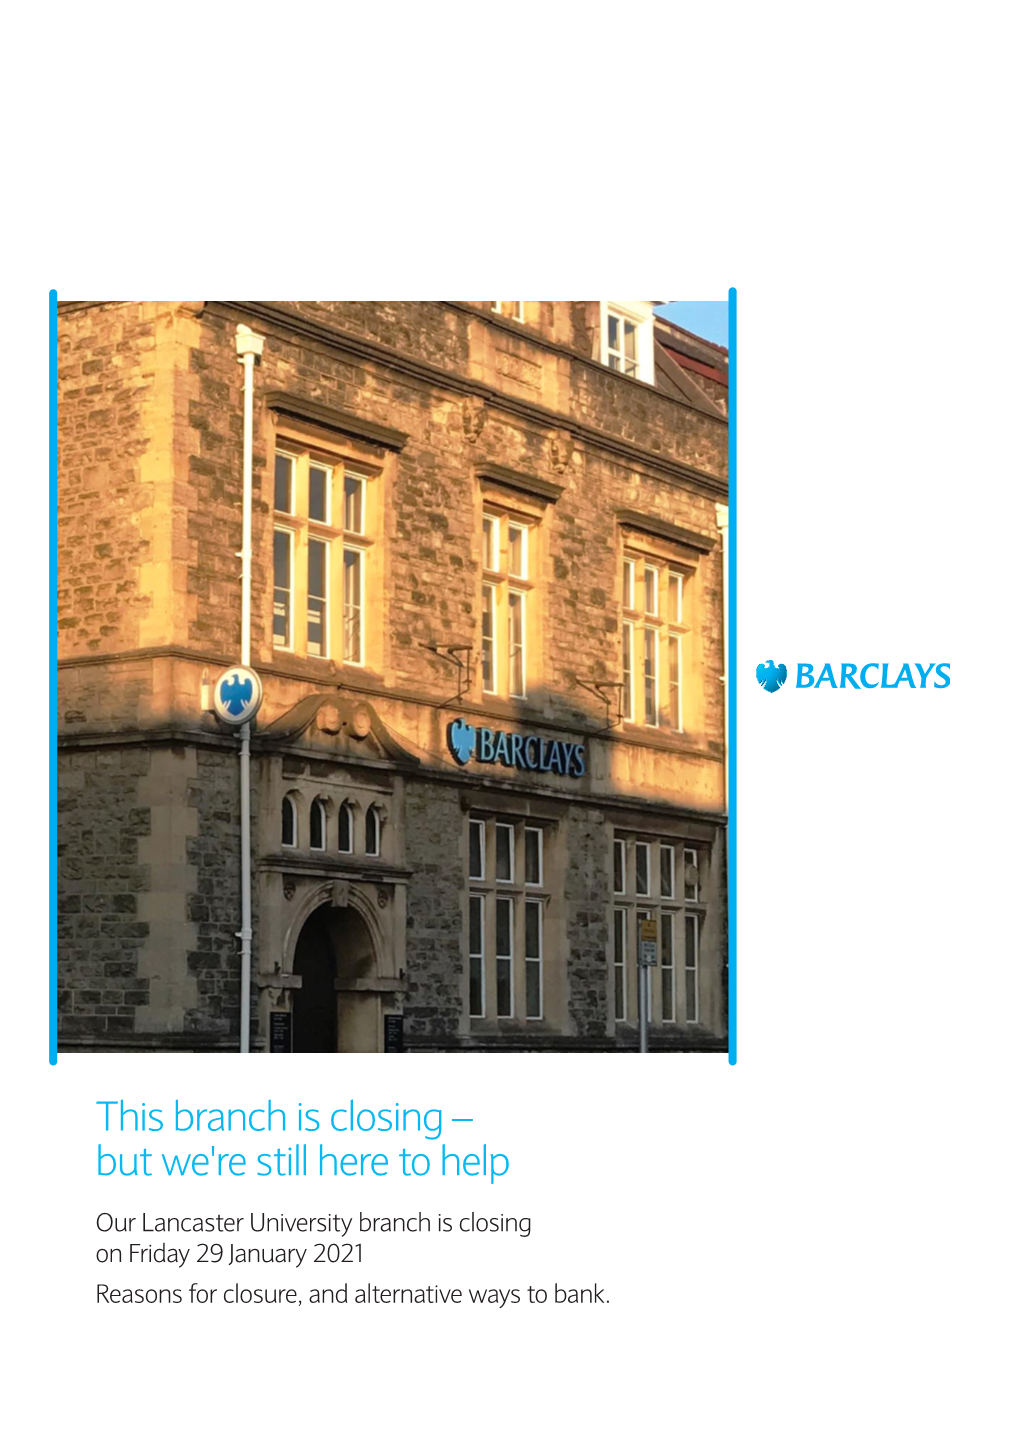 Lancaster University Branch Is Closing on Friday 29 January 2021 Reasons for Closure, and Alternative Ways to Bank